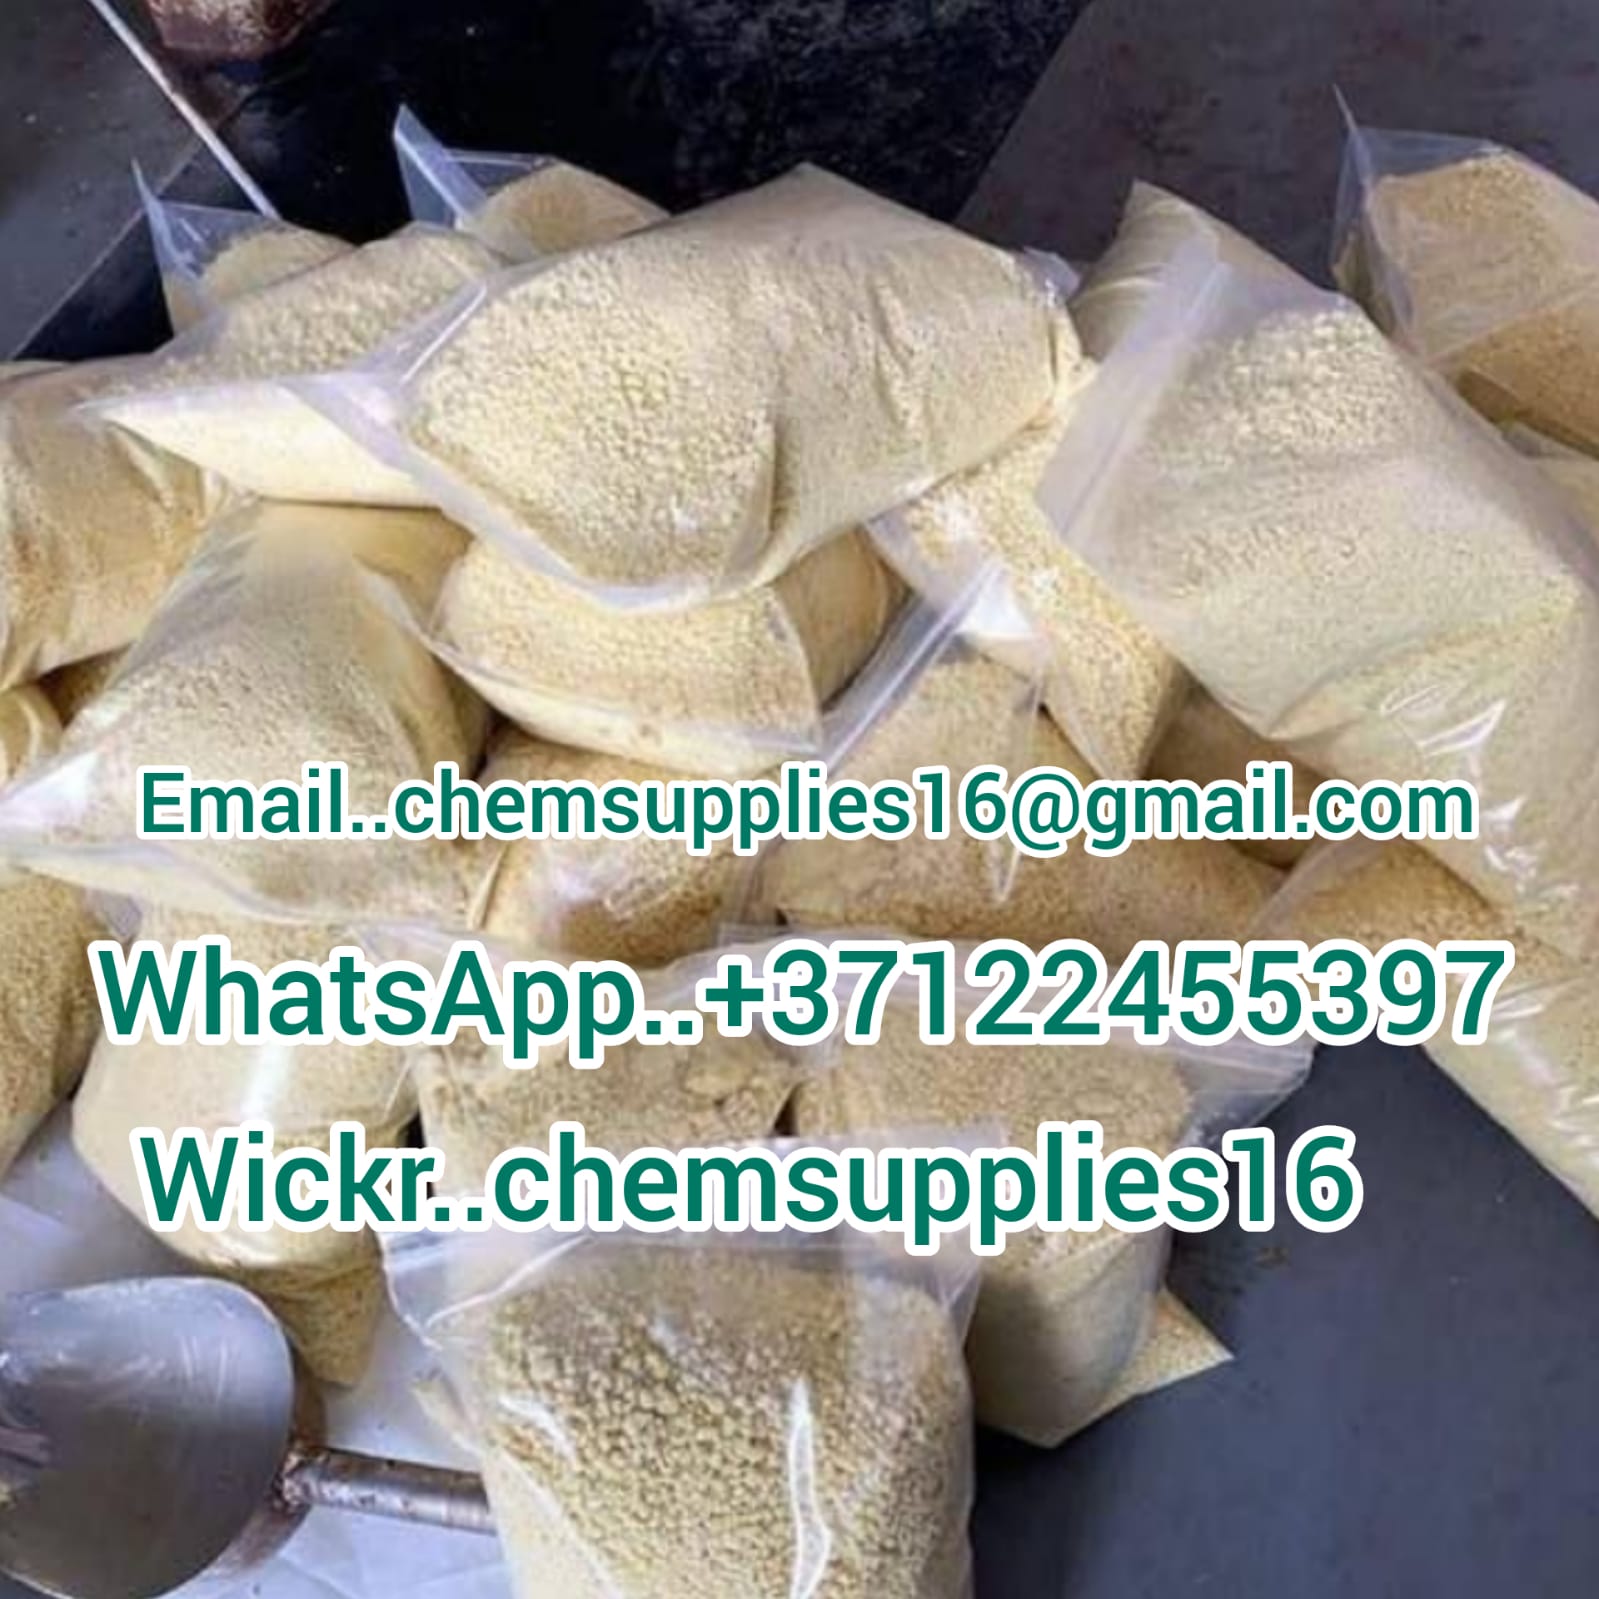 Buy Synthetic Can Nabinoids  Buy K2 Spice Paper | Buy K2 Paper | Buy K2 Spray | Buy 5cladba | Buy 5F